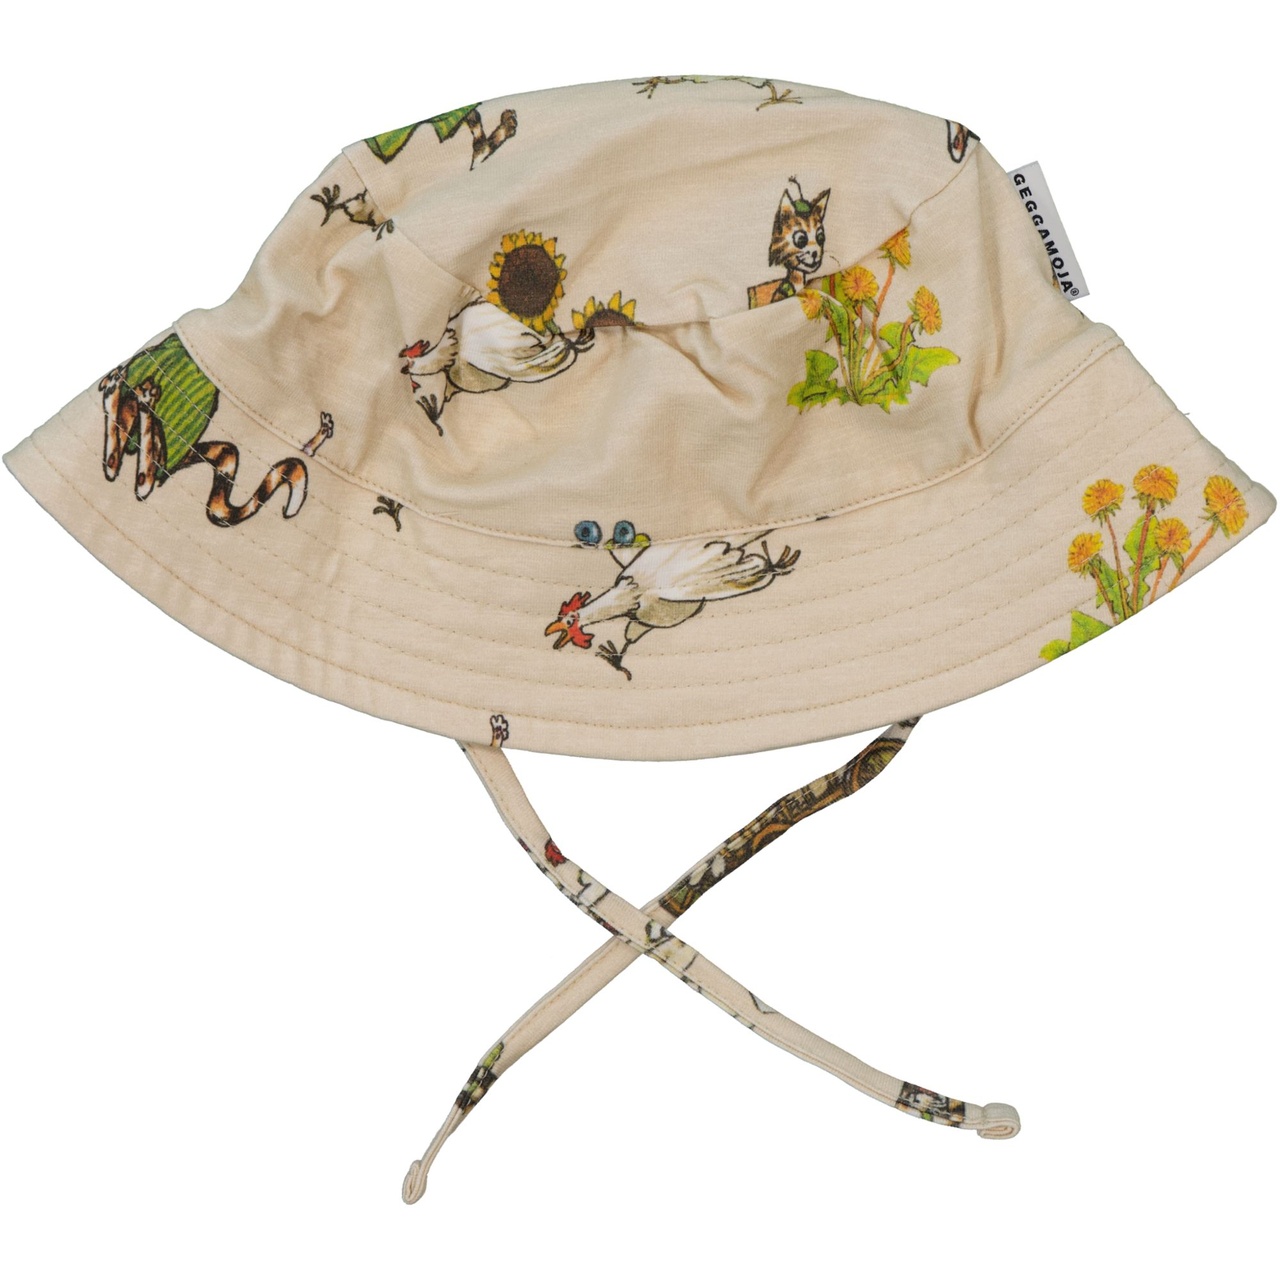 Sunny hat Pettson and Findus Beige 2-6Y